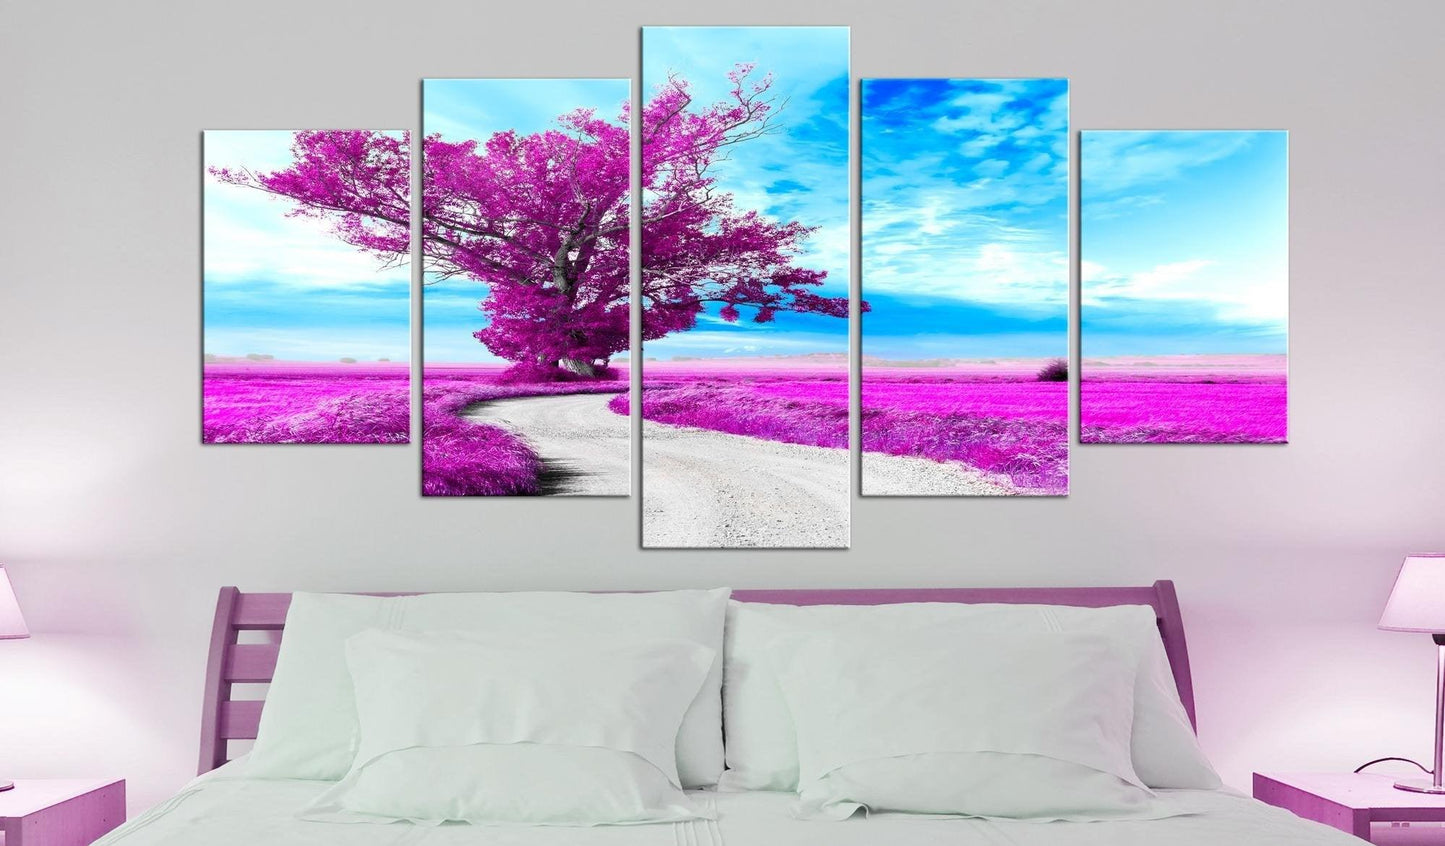 Canvas Print - Tree near the Road (5 Parts) Violet - www.trendingbestsellers.com